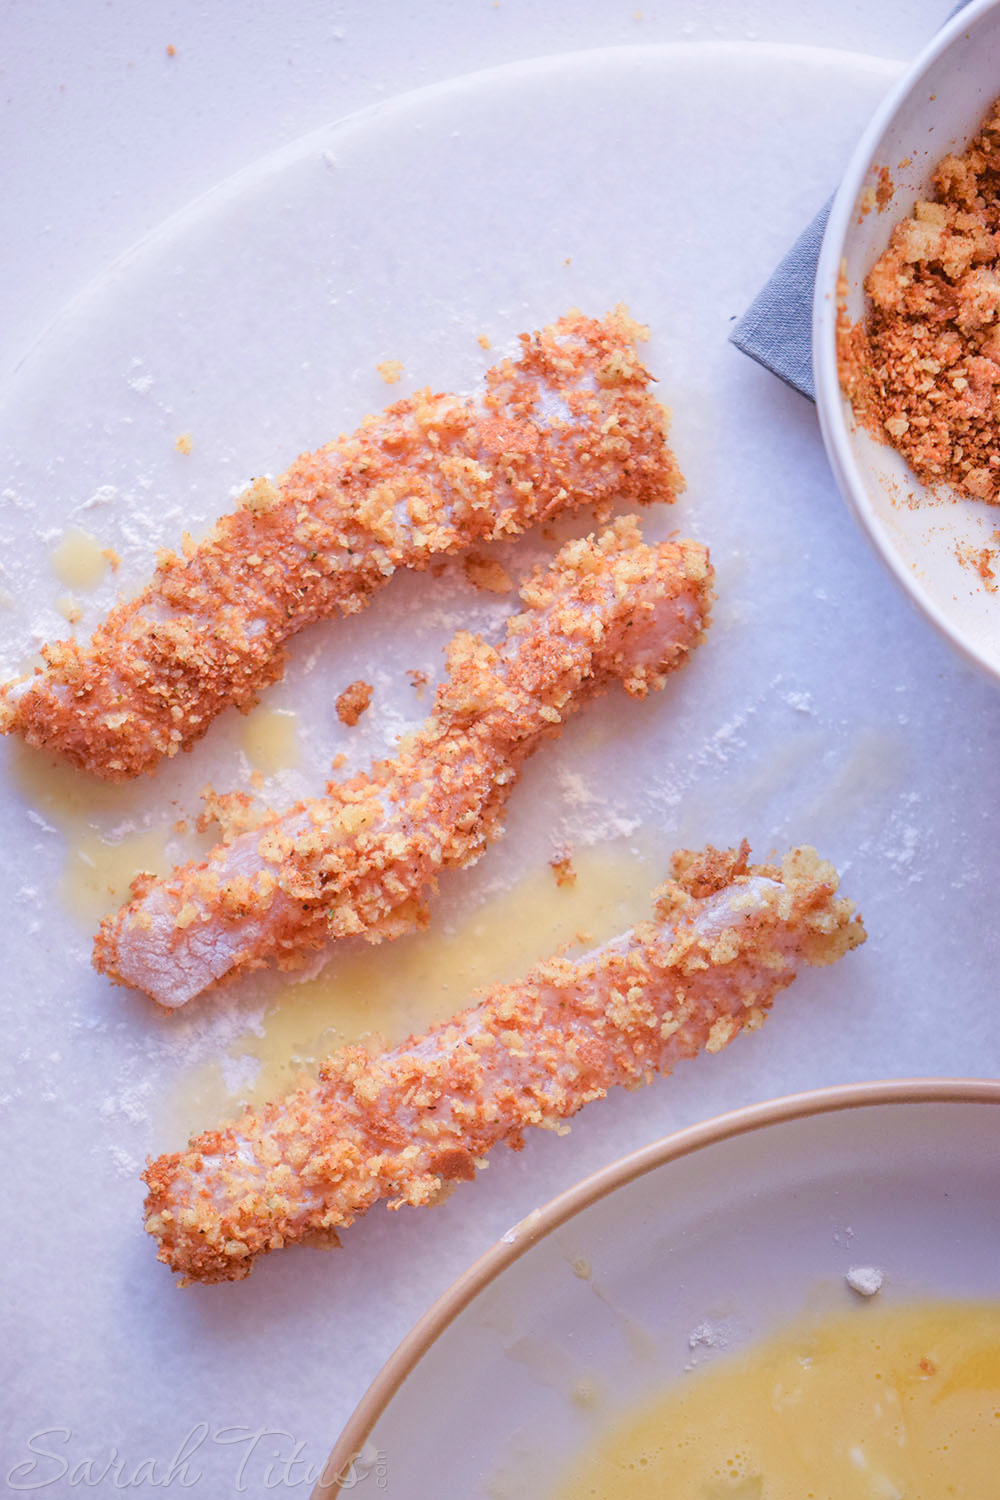 The sliced chicken pieces dipped in the breadcrumbs